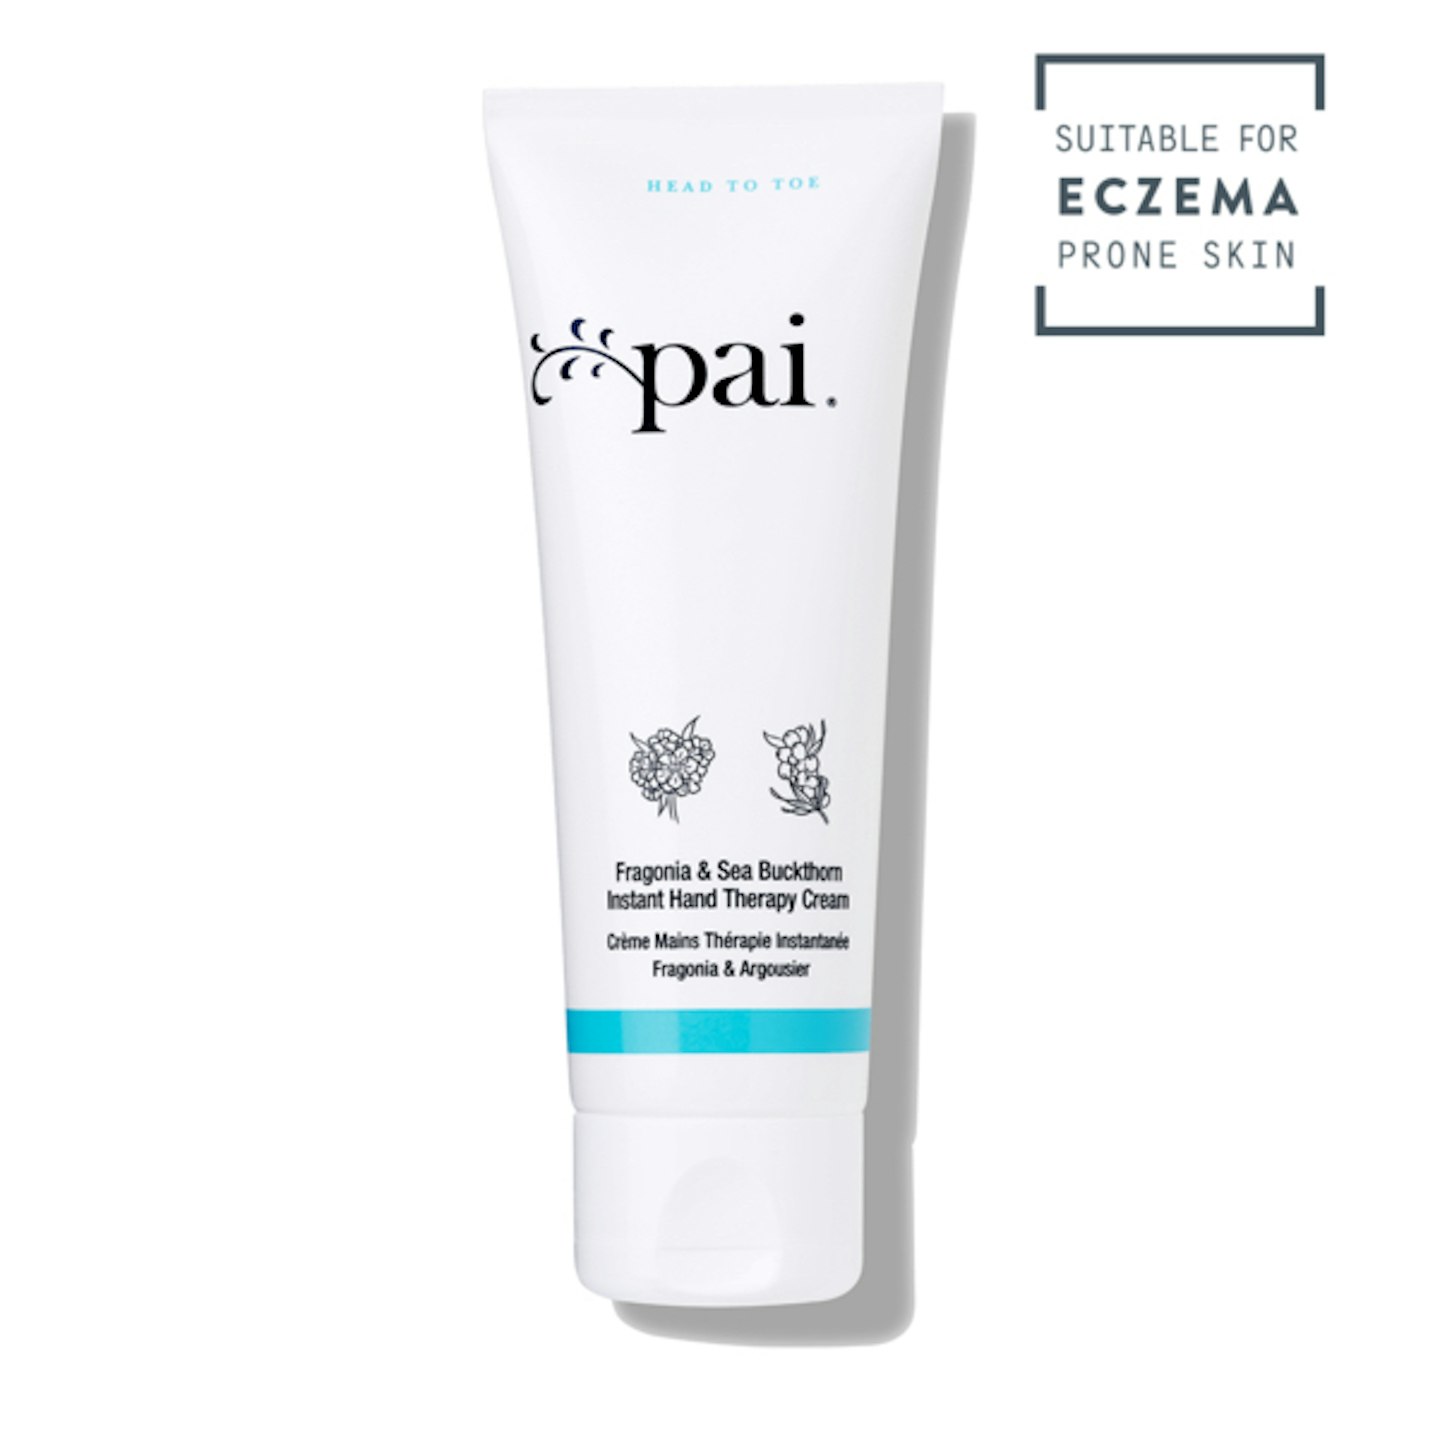 Pai, Fragonia & Sea Buckthorn Instant Hand Therapy Cream, £18